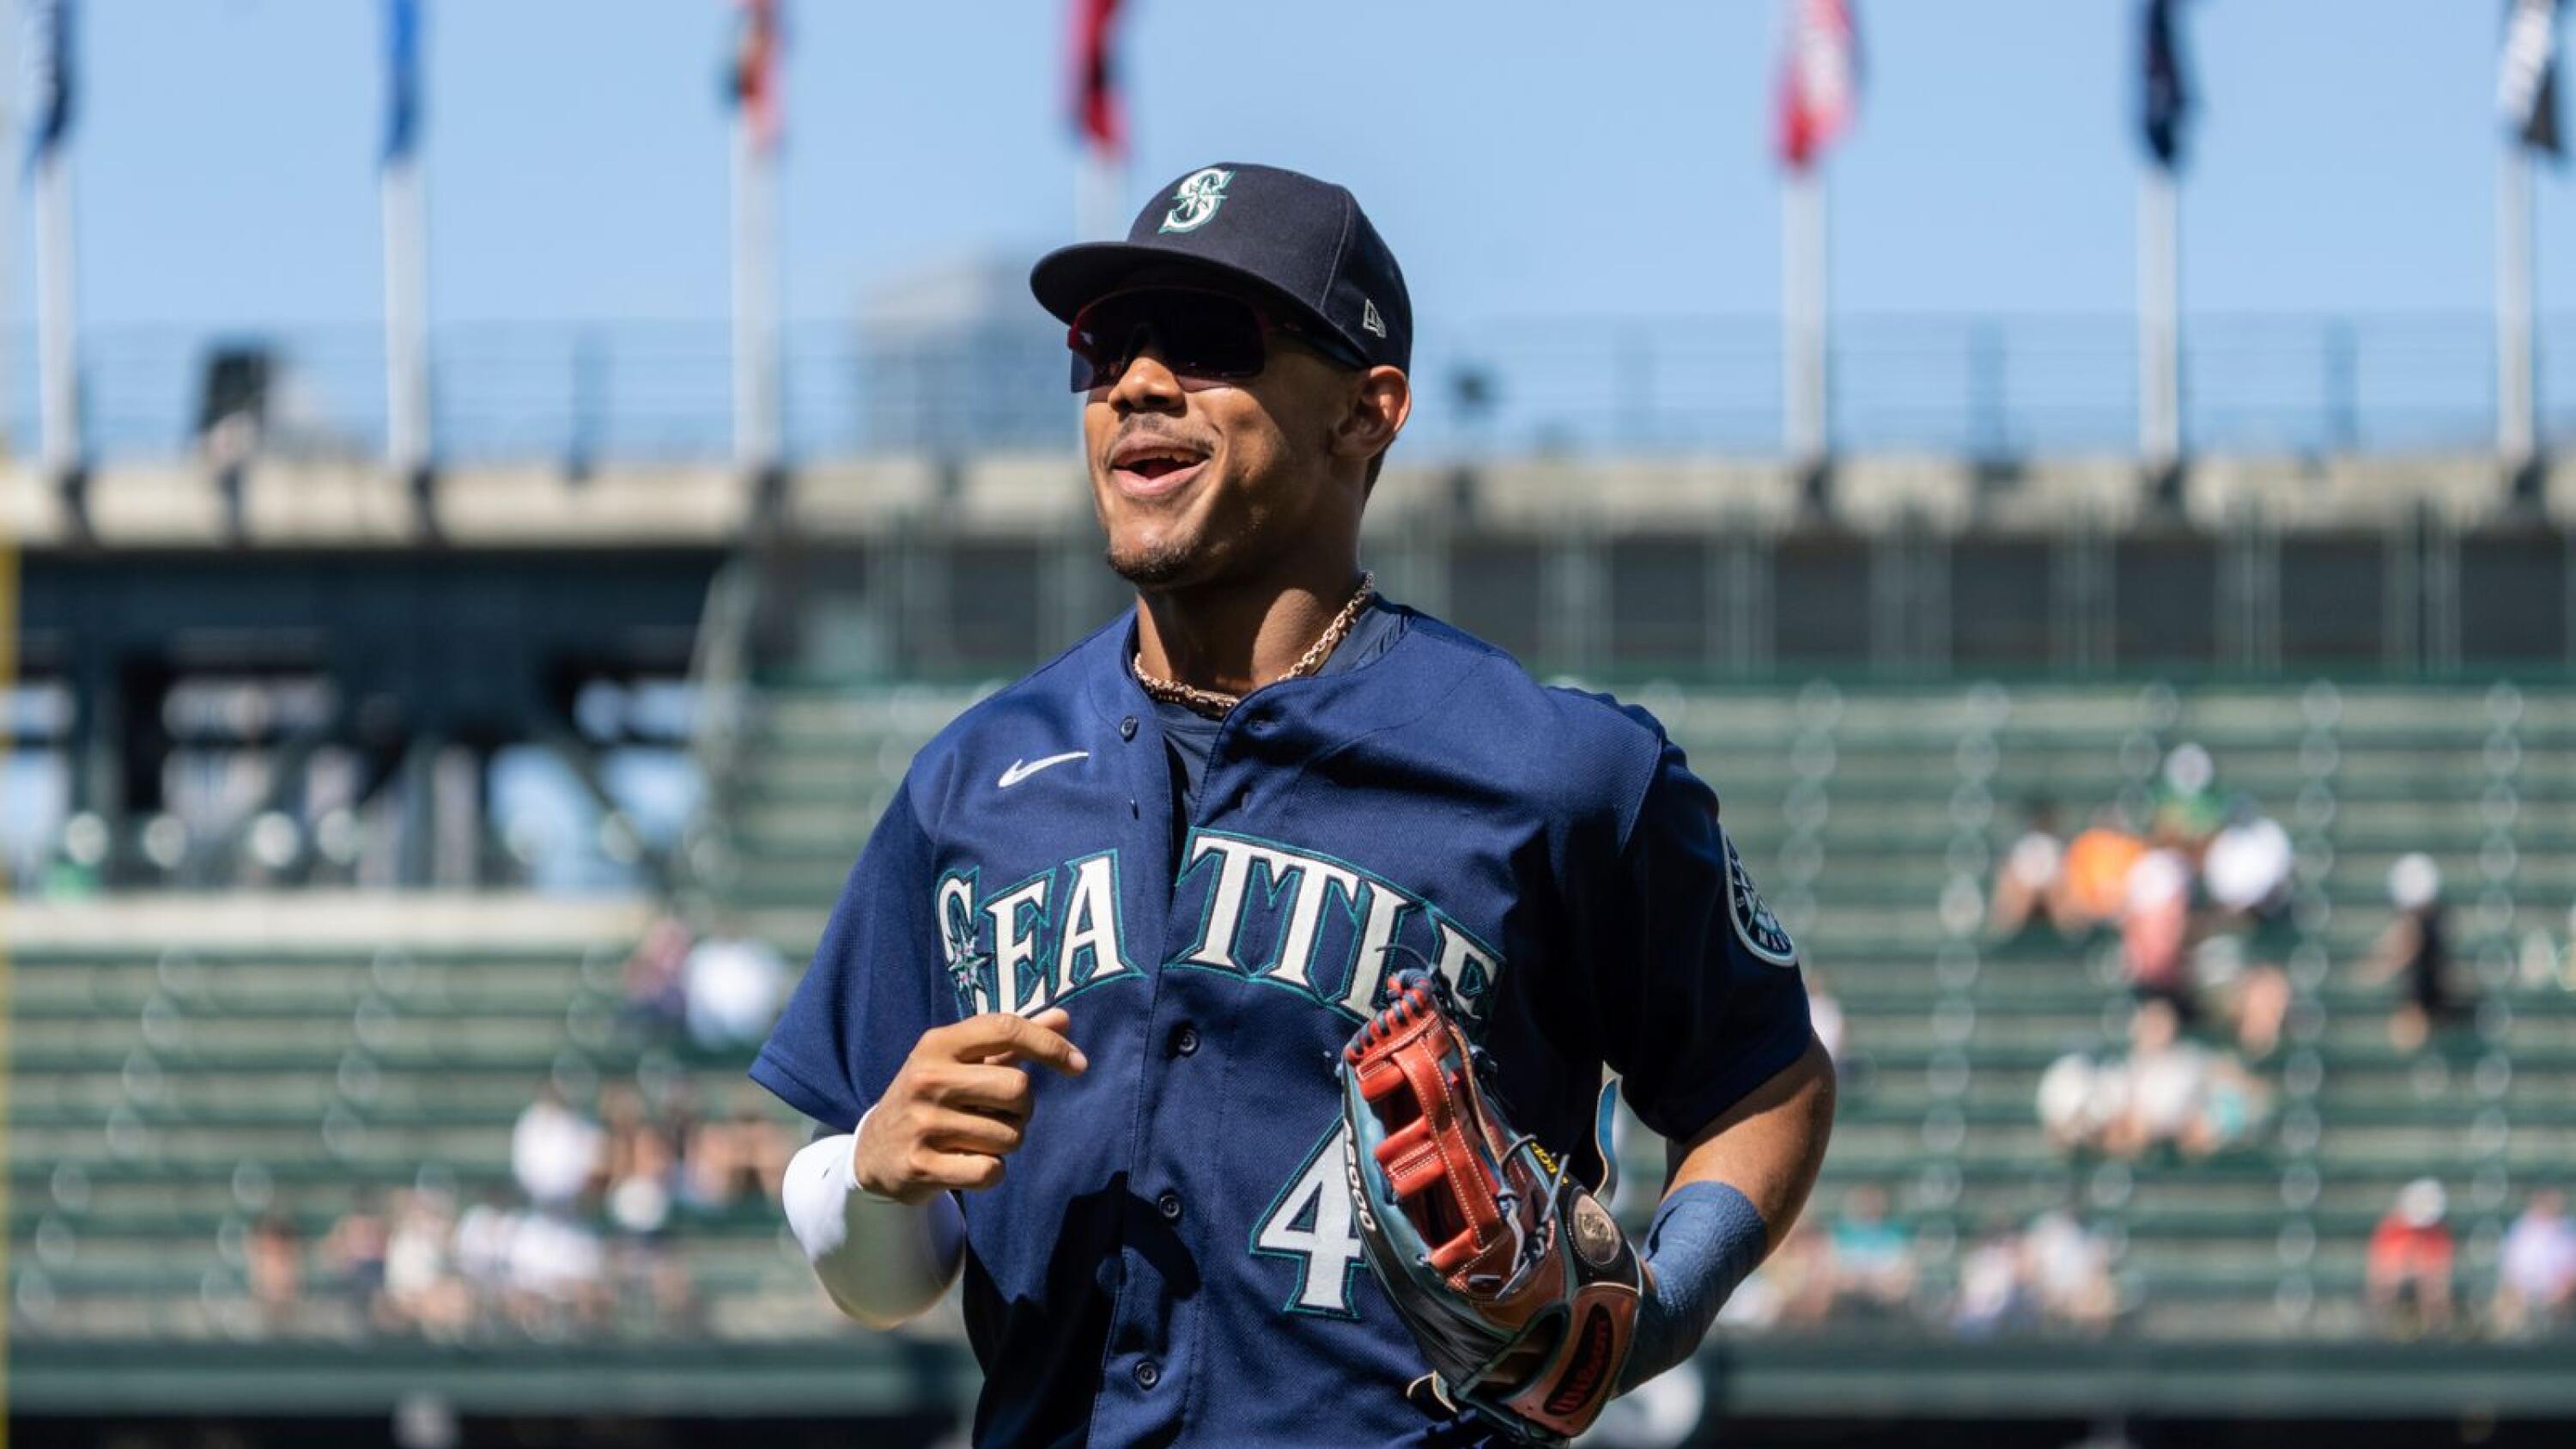 Olympic baseball bronze medalist Julio Rodriguez added to Seattle